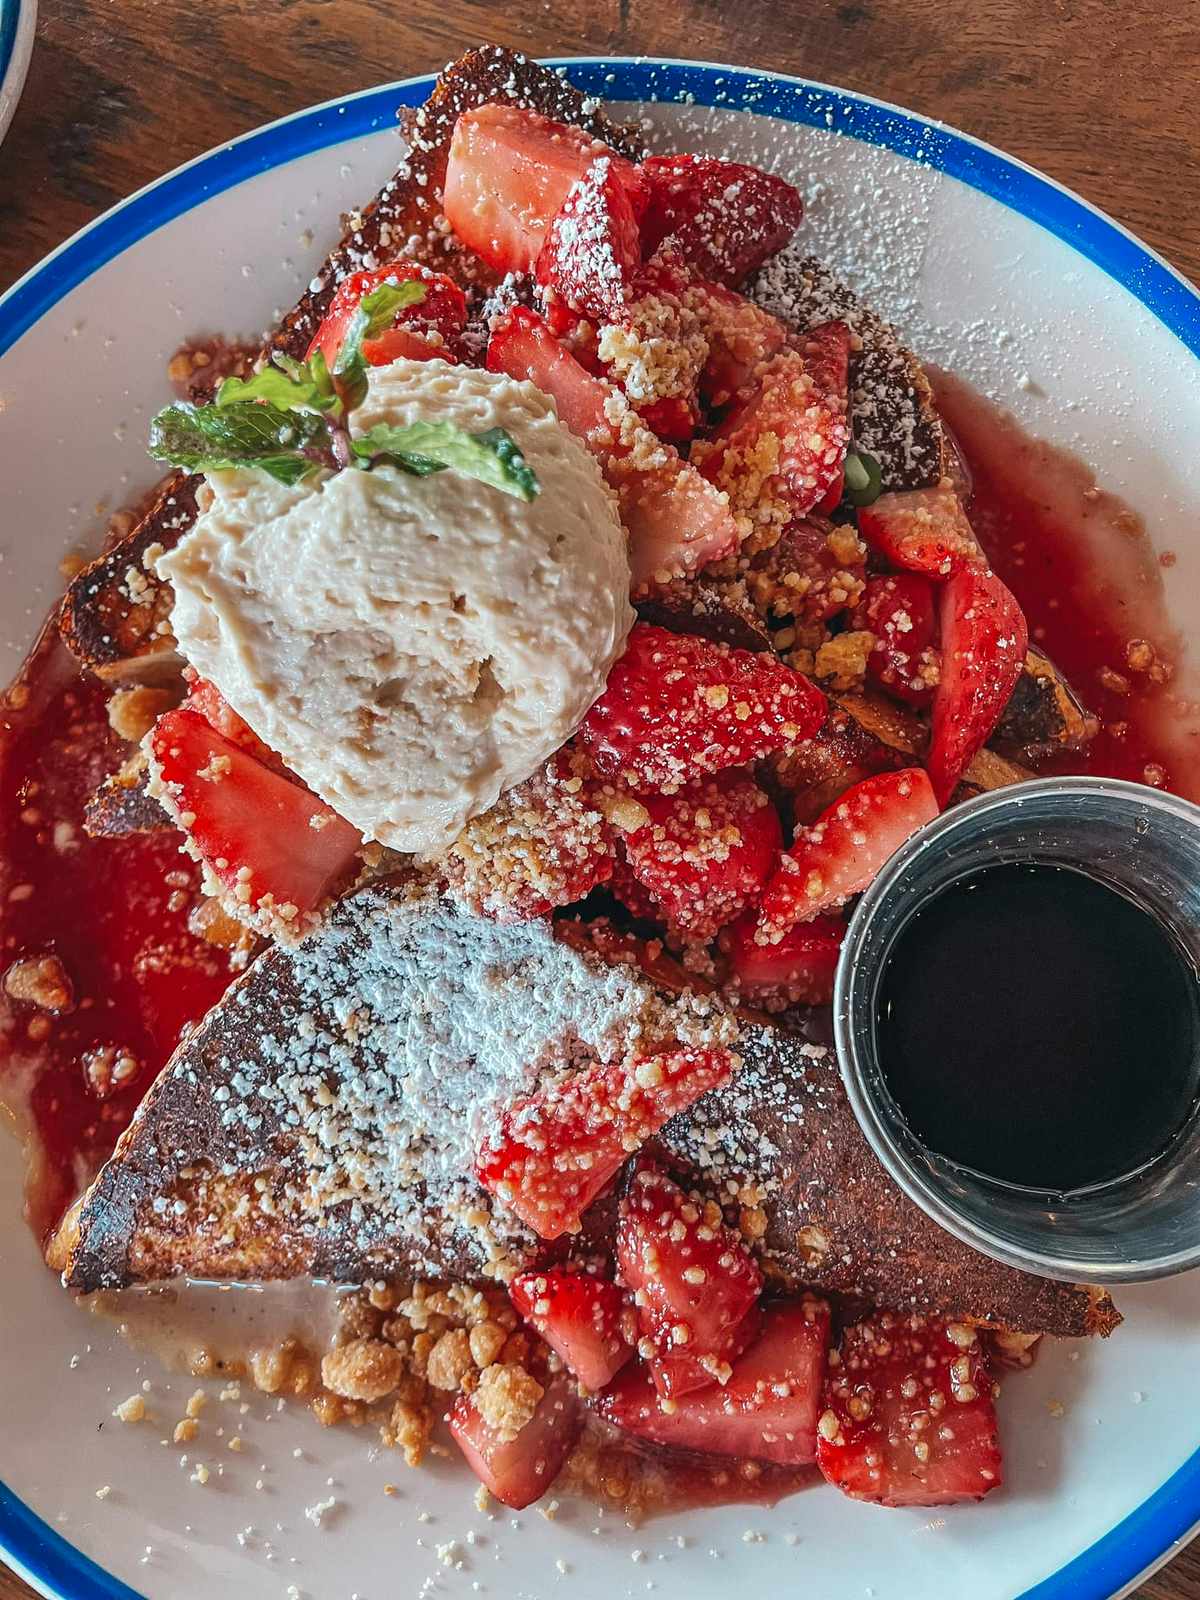 Strawberry french toast from Noble Crust in St. Pete